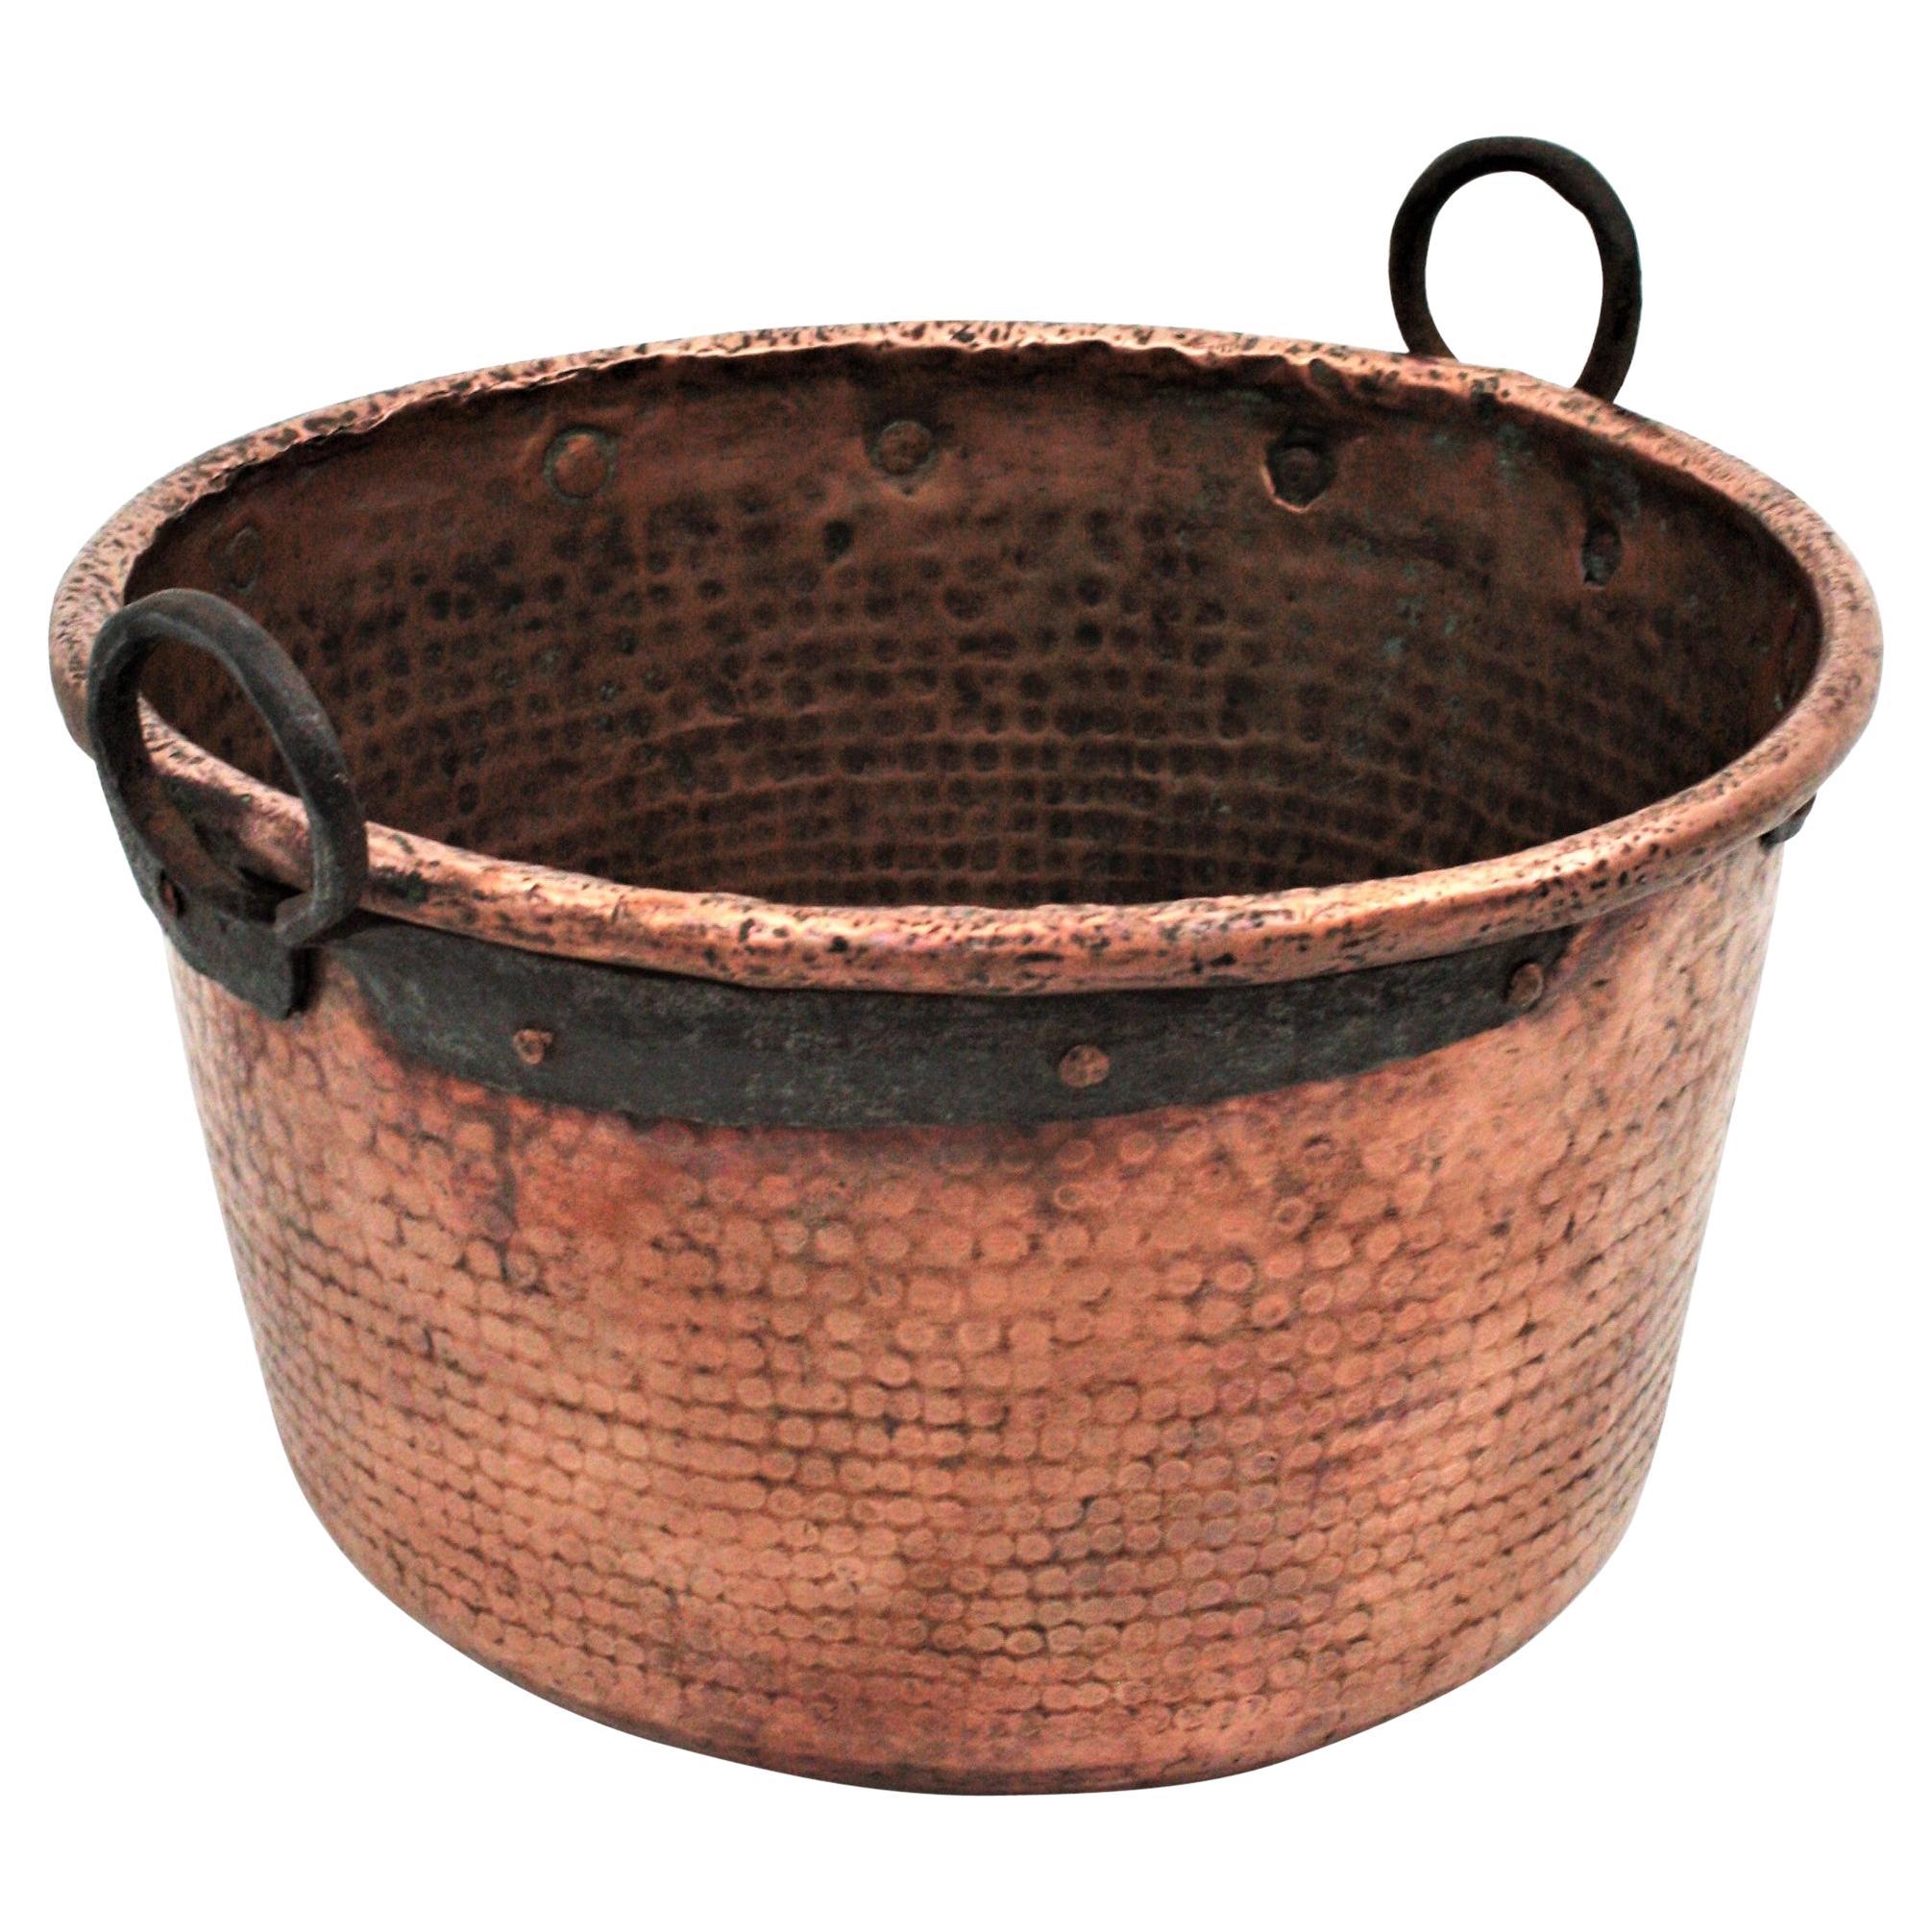 Massive French Copper Cauldron with Handles